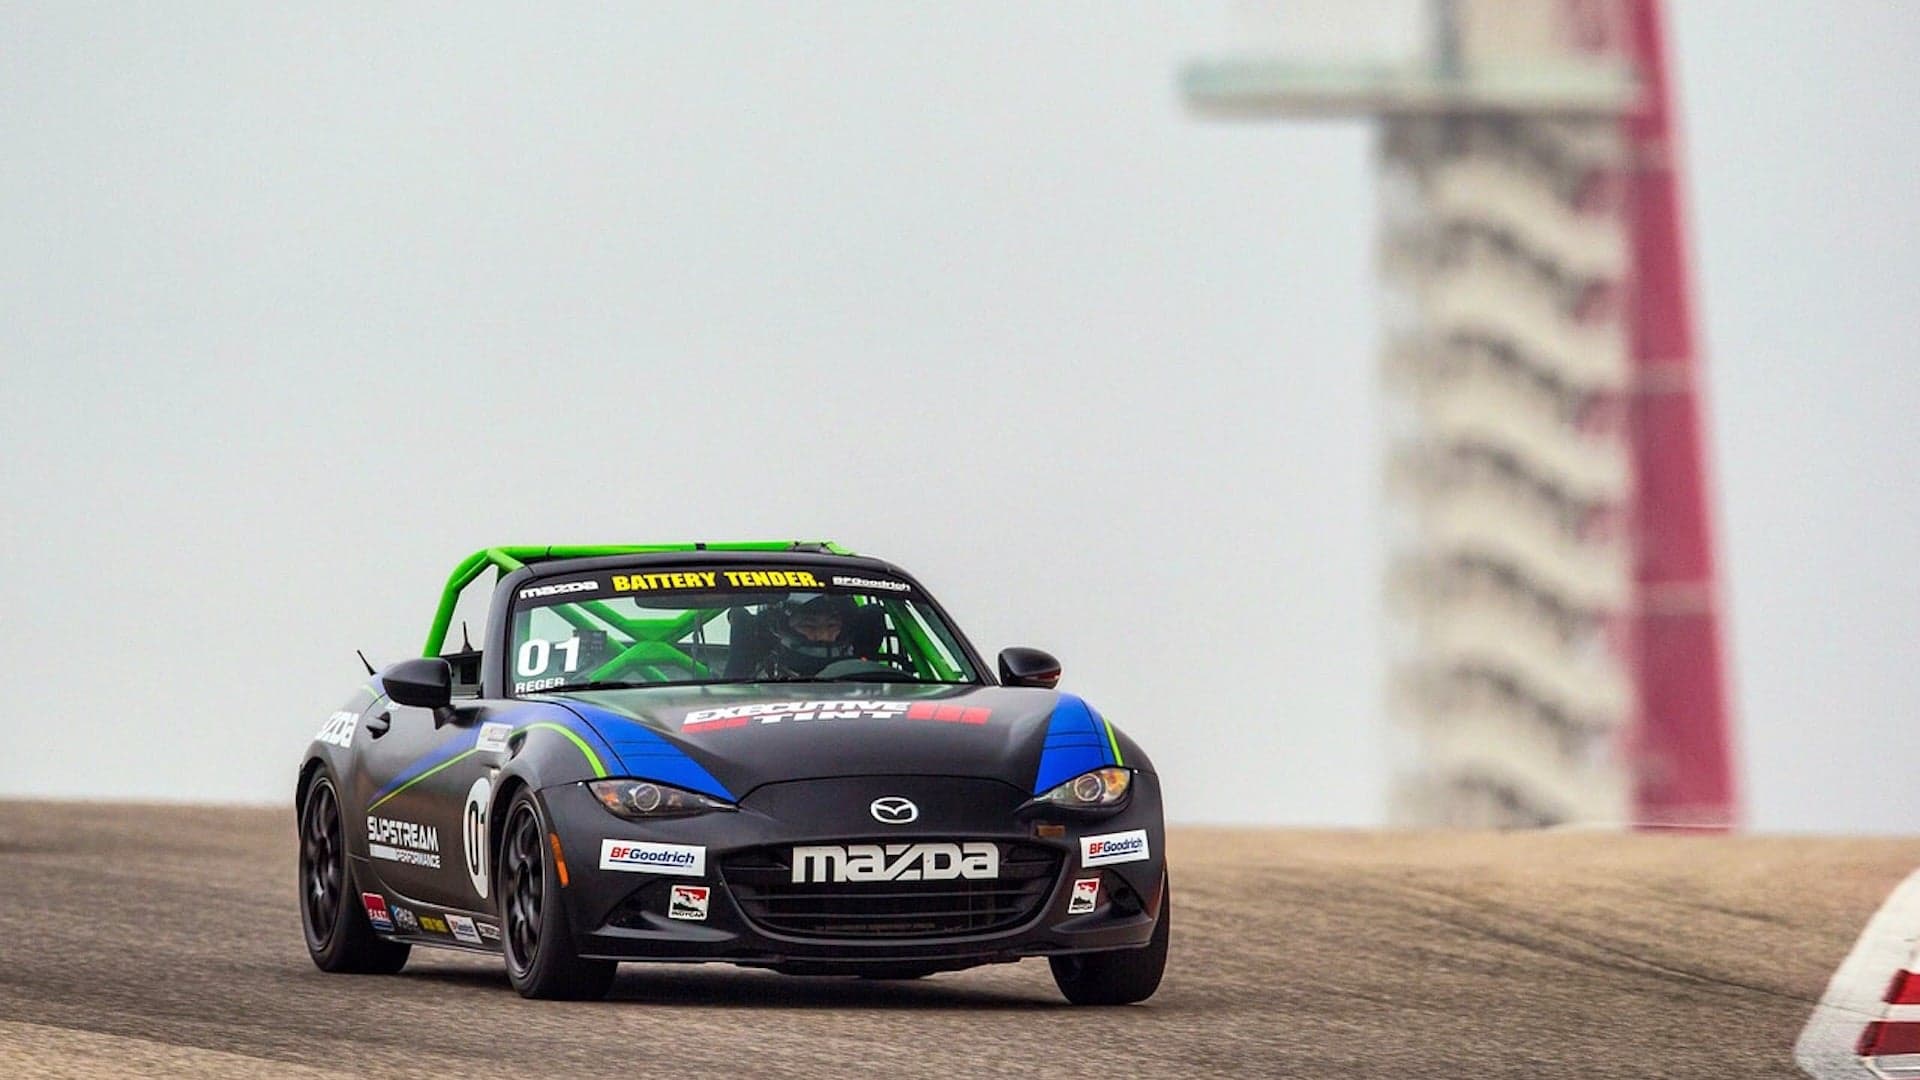 2019 Global Mazda MX-5 Cup Season to Feature More Powerful Cars, $375K in Scholarships